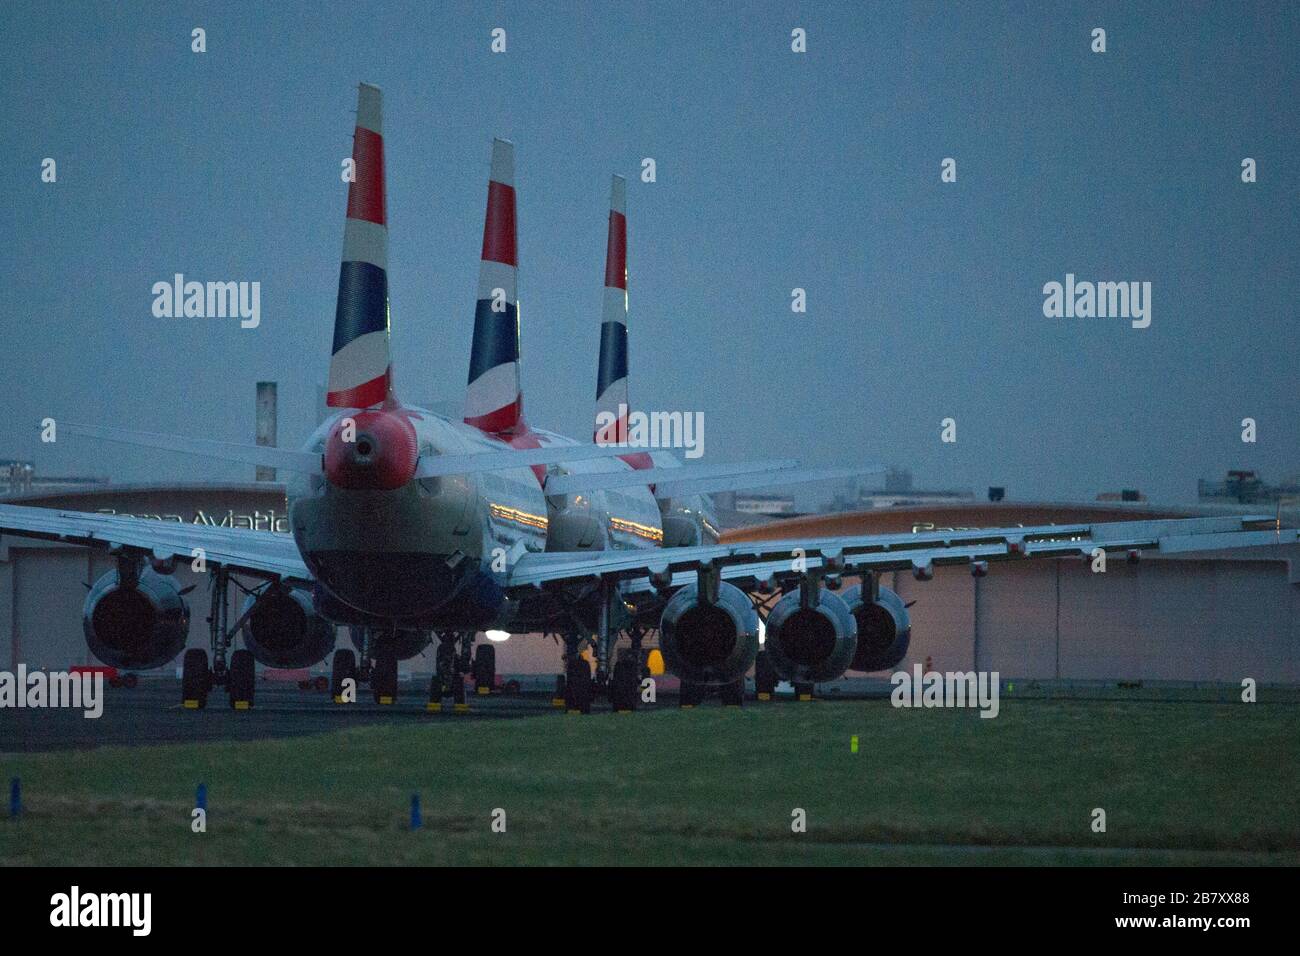 Glasgow, UK. 18th Mar, 2020. Pictured: British airways Airbus A321 Jets stand grounded on the tarmac of Glasgow International Airport, due to British Airways and other airlines deciding to cancel a massive amount of flights to stop the spread of the Coronavirus. Also a number of countries are also not accepting any UK flights which further compounds the economic downturn the UK aviation is presently experiencing. Credit: Colin Fisher/Alamy Live News Stock Photo